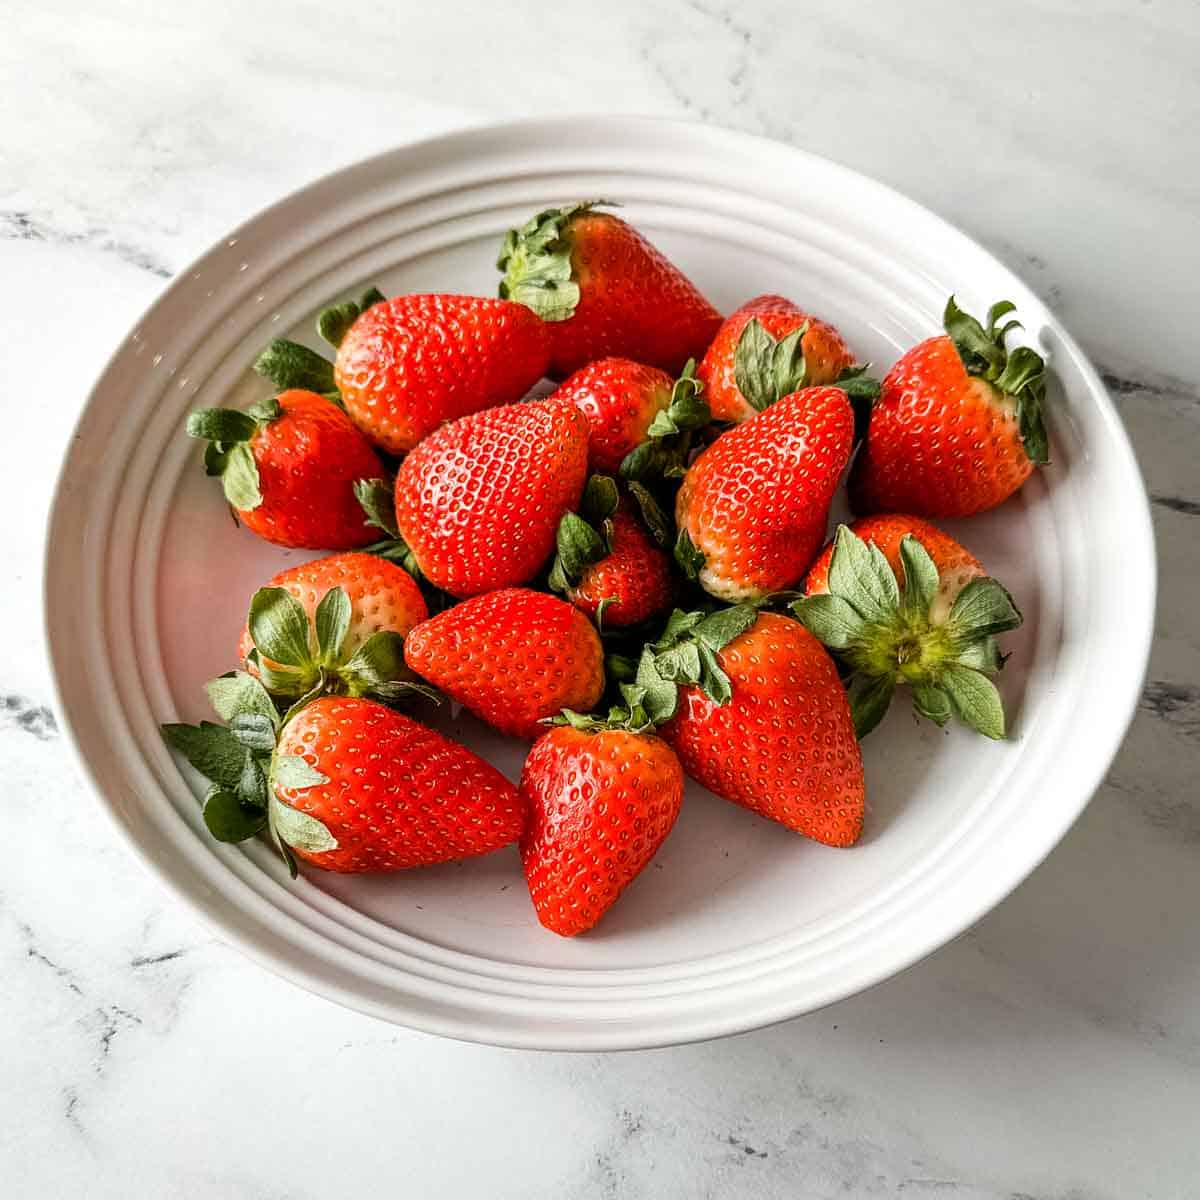 Fresh strawberries sit in a white bowl on a white marble counter.